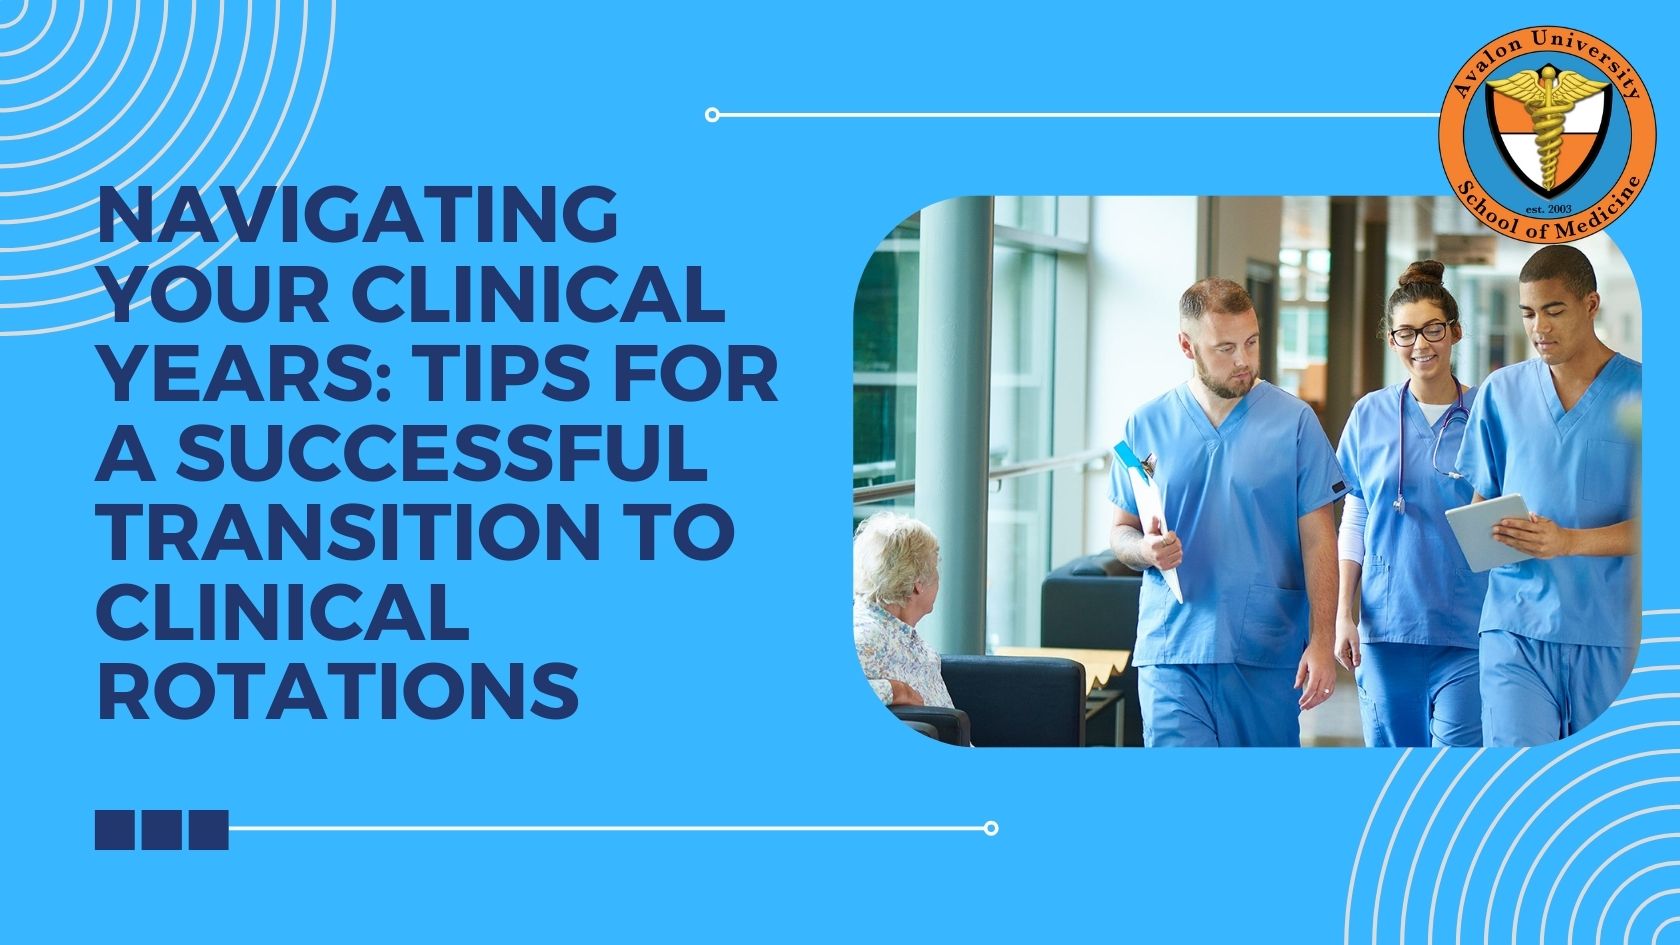 Tips for a Successful Transition to Clinical Rotations